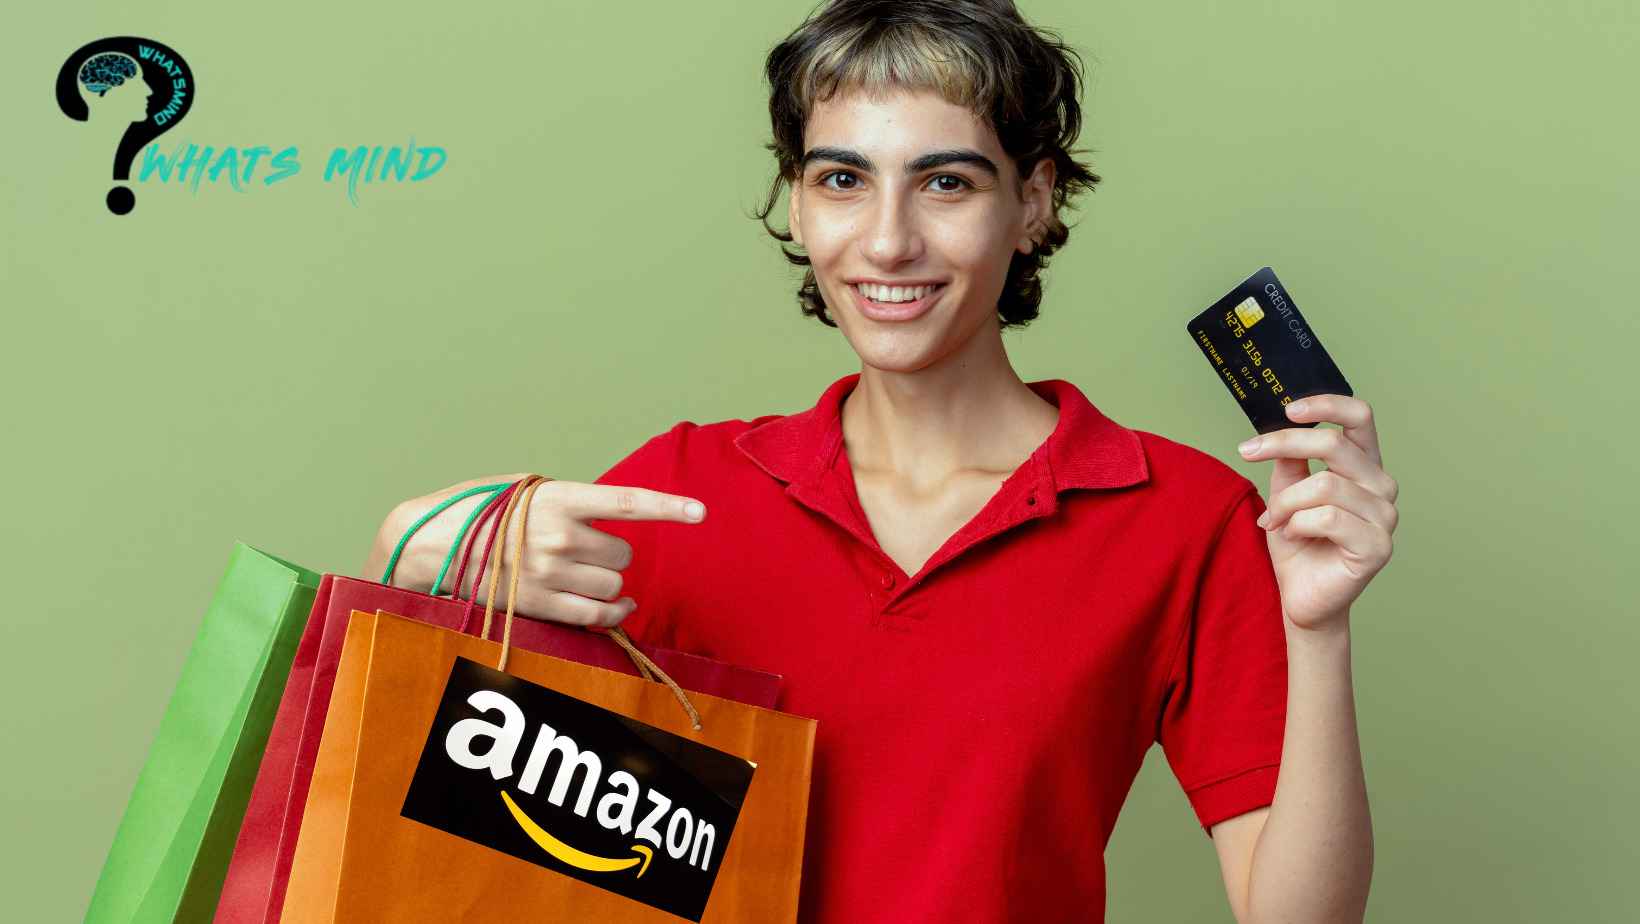 How to use visa gift card on Amazon?